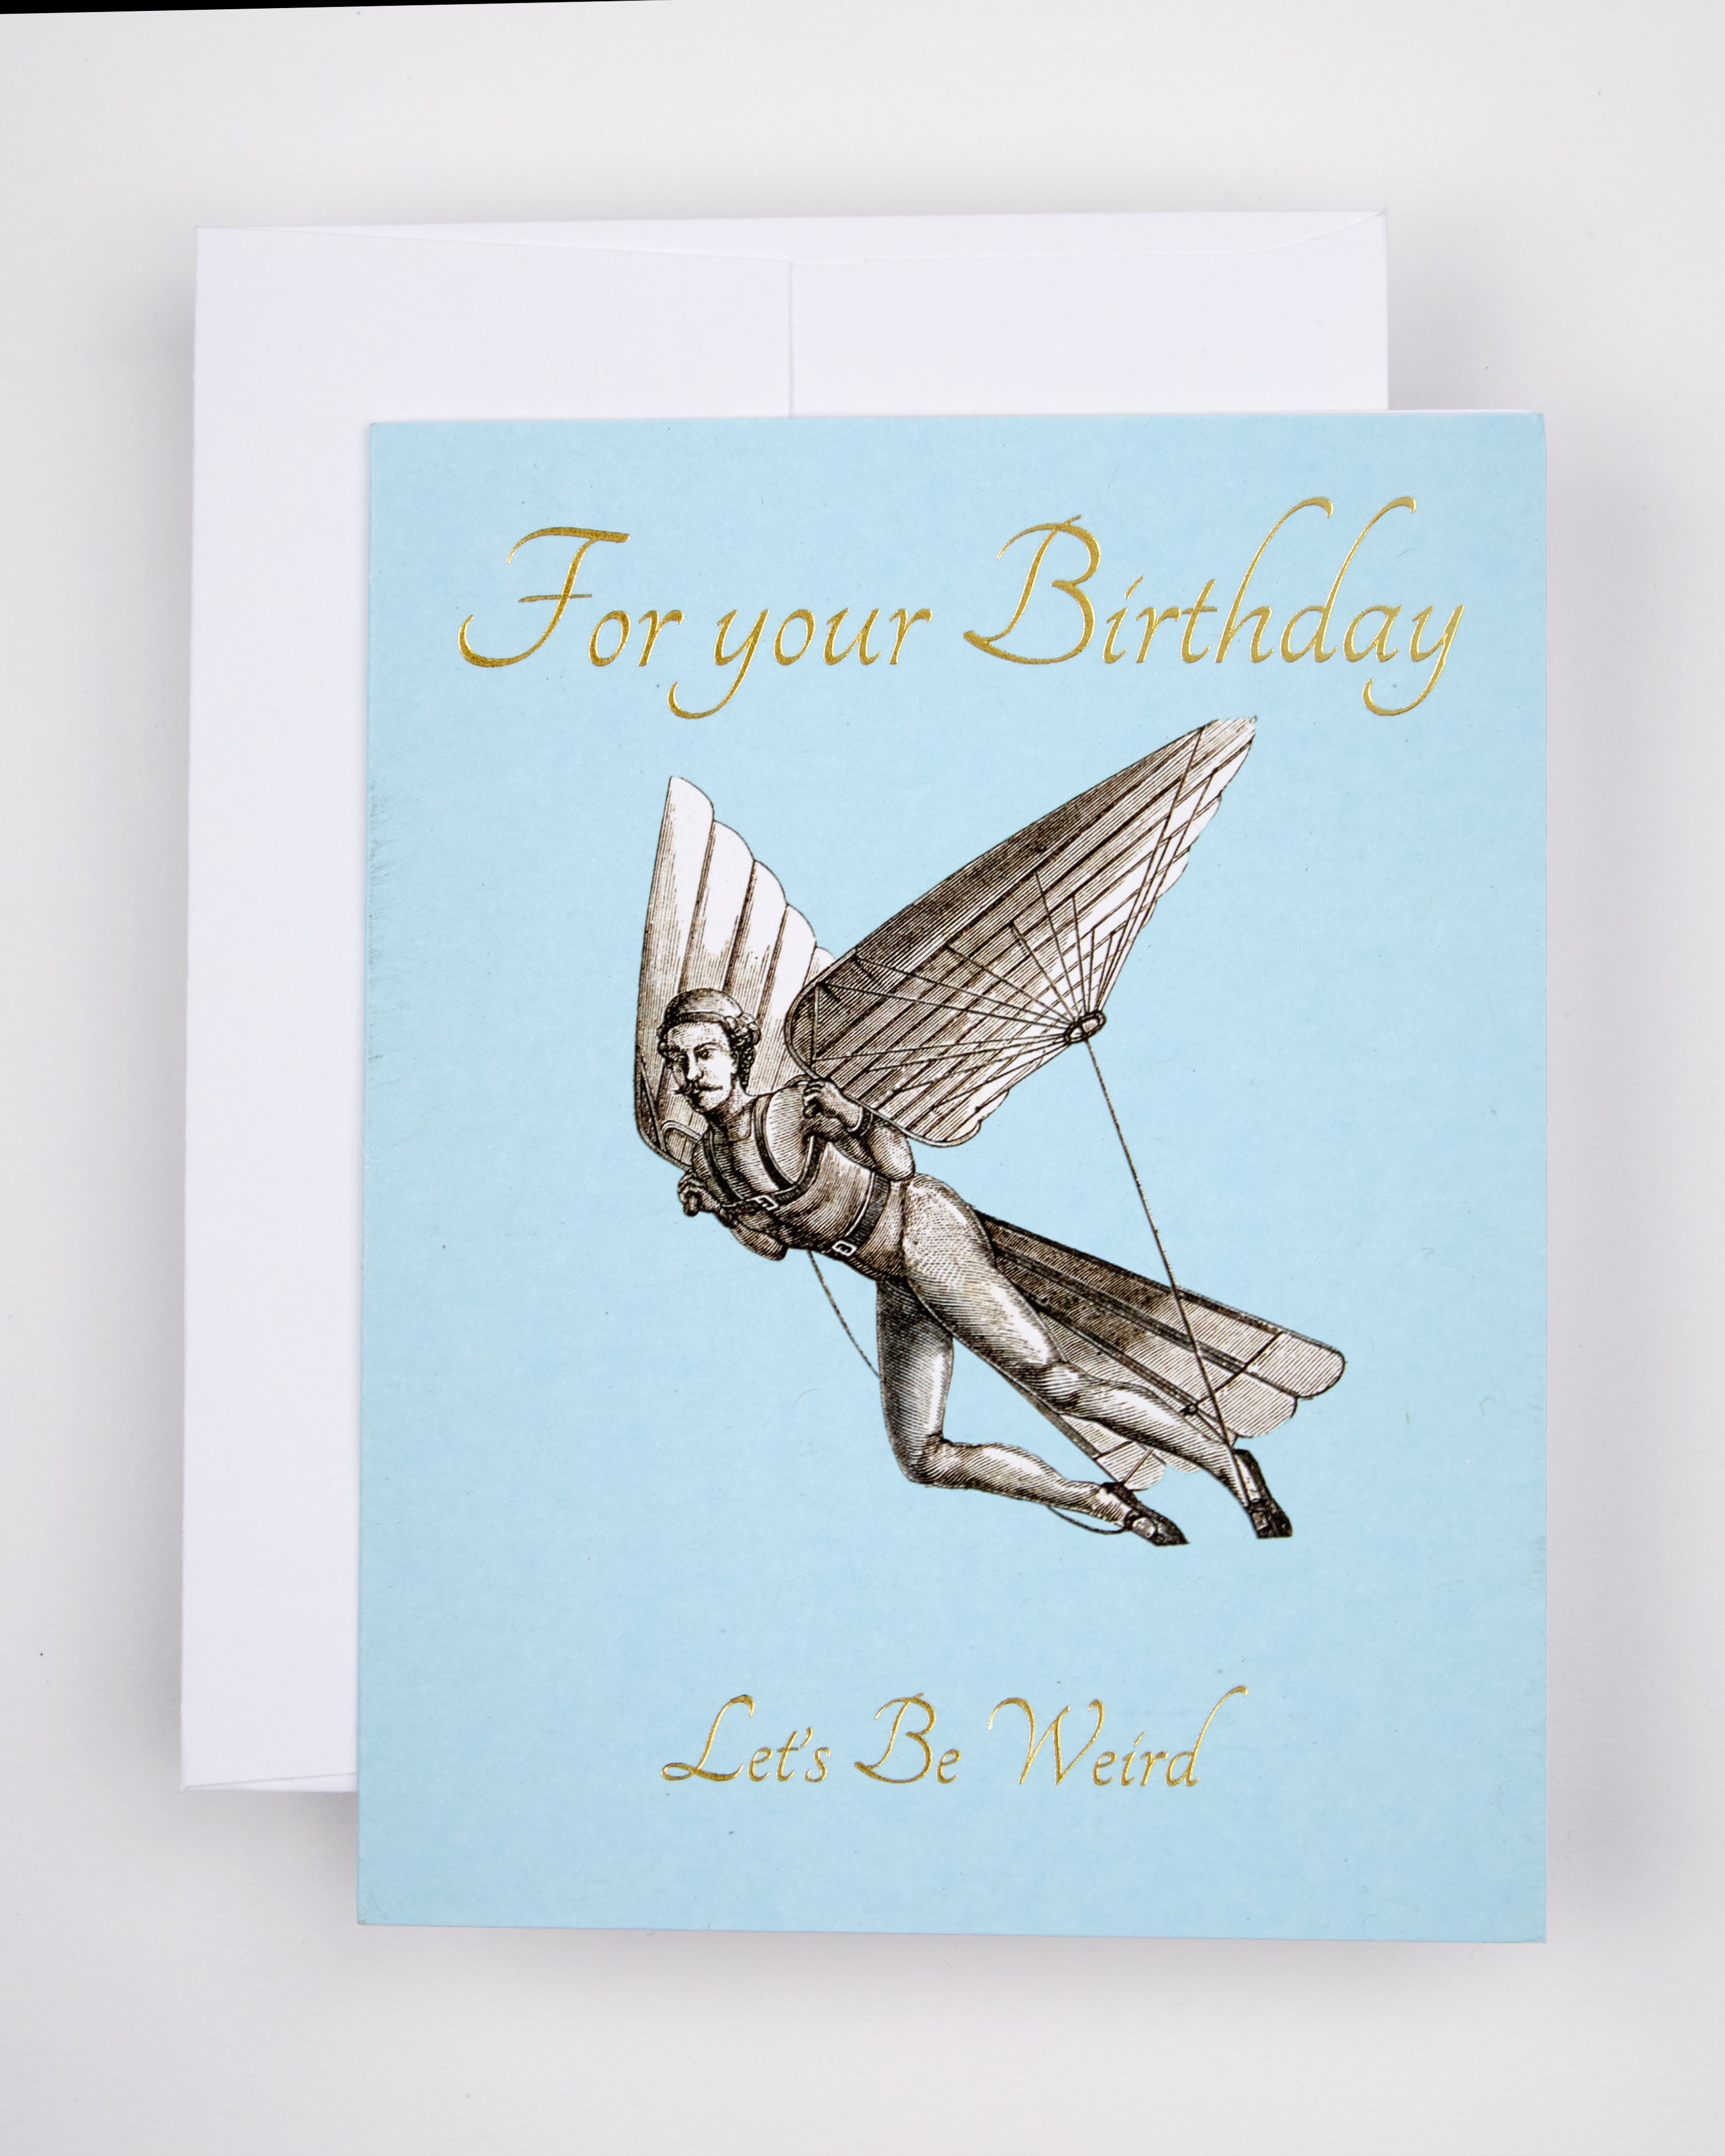 Greeting card with the text For Your Birthday Let's Be Weird and a flying man